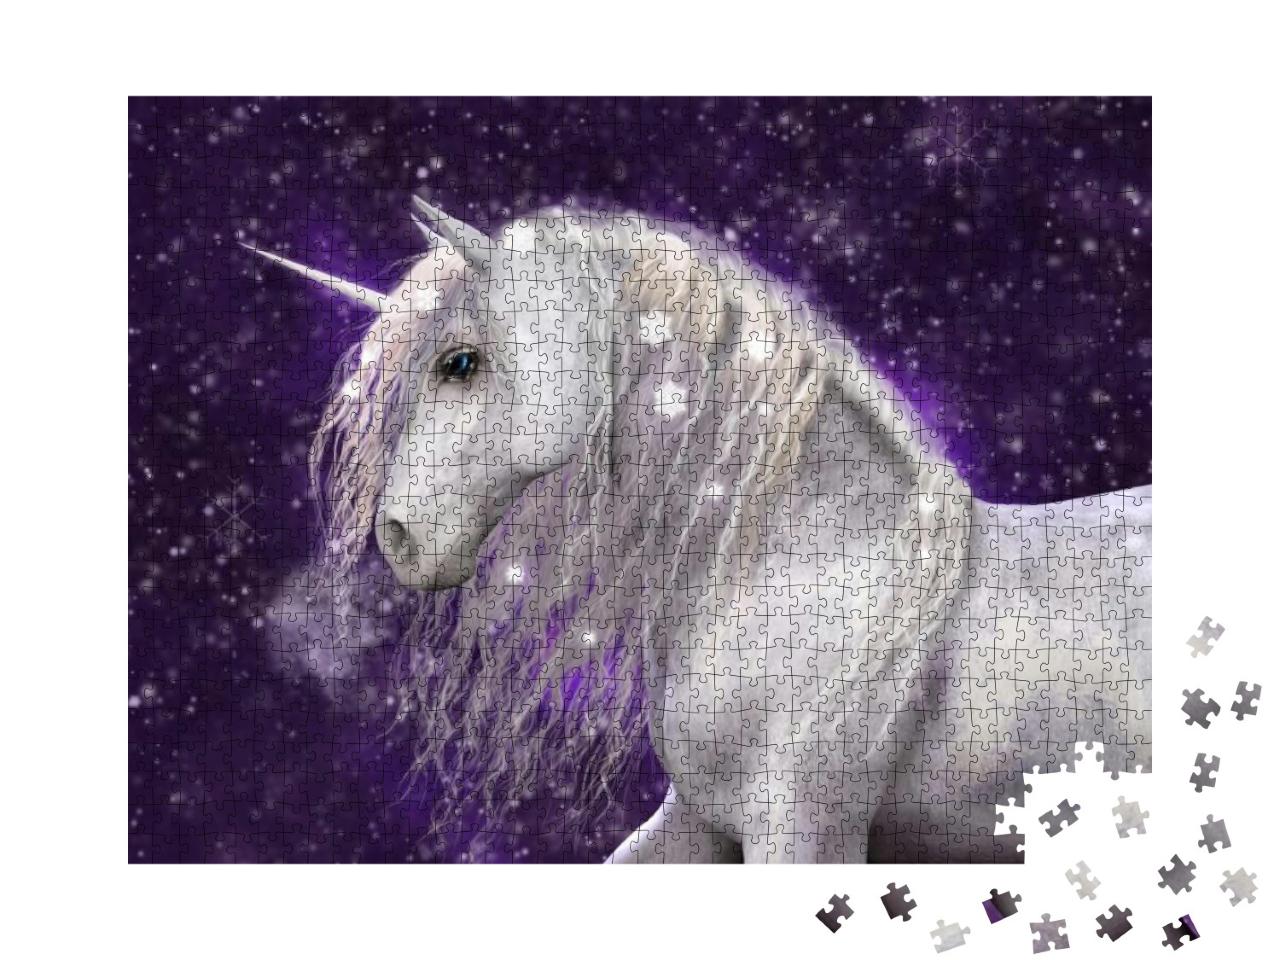 A Beautiful White Unicorn with Silvery Mane that Has Spar... Jigsaw Puzzle with 1000 pieces